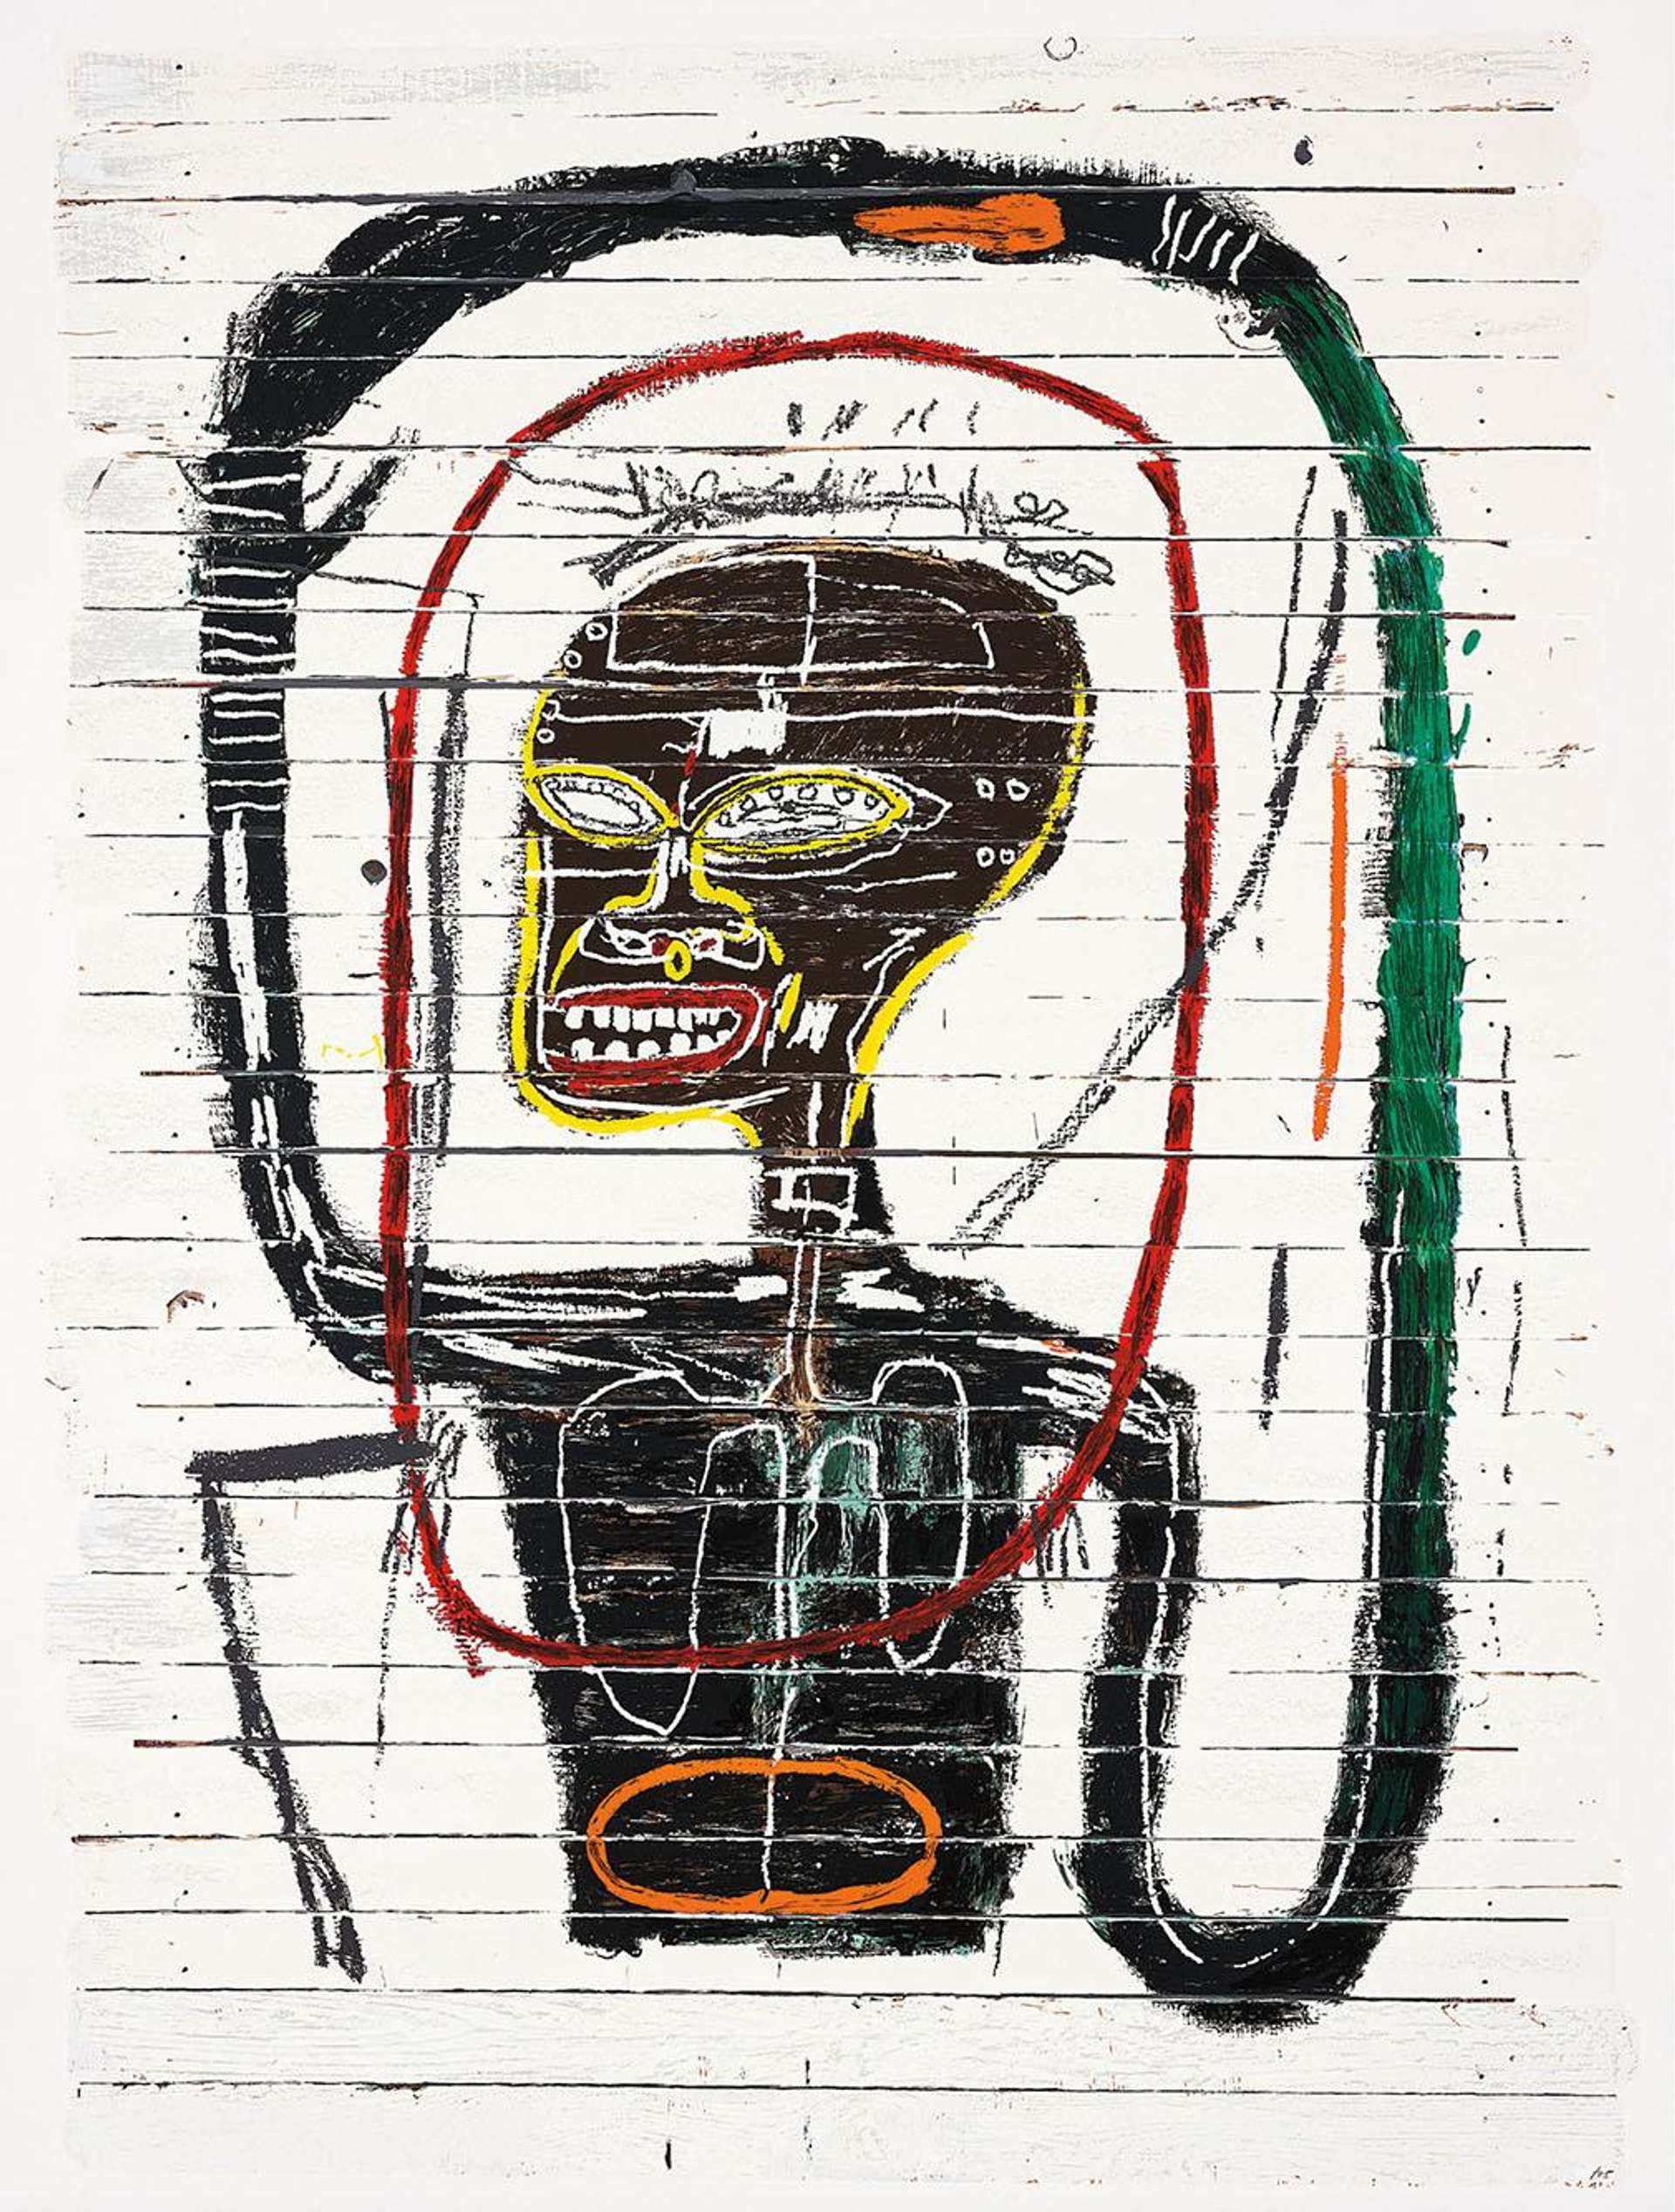 Jean-Michel Basquiat’s Flexible. A Neo-Expressionist screenprint of an anatomical figure with exposed internal structures against a white background.